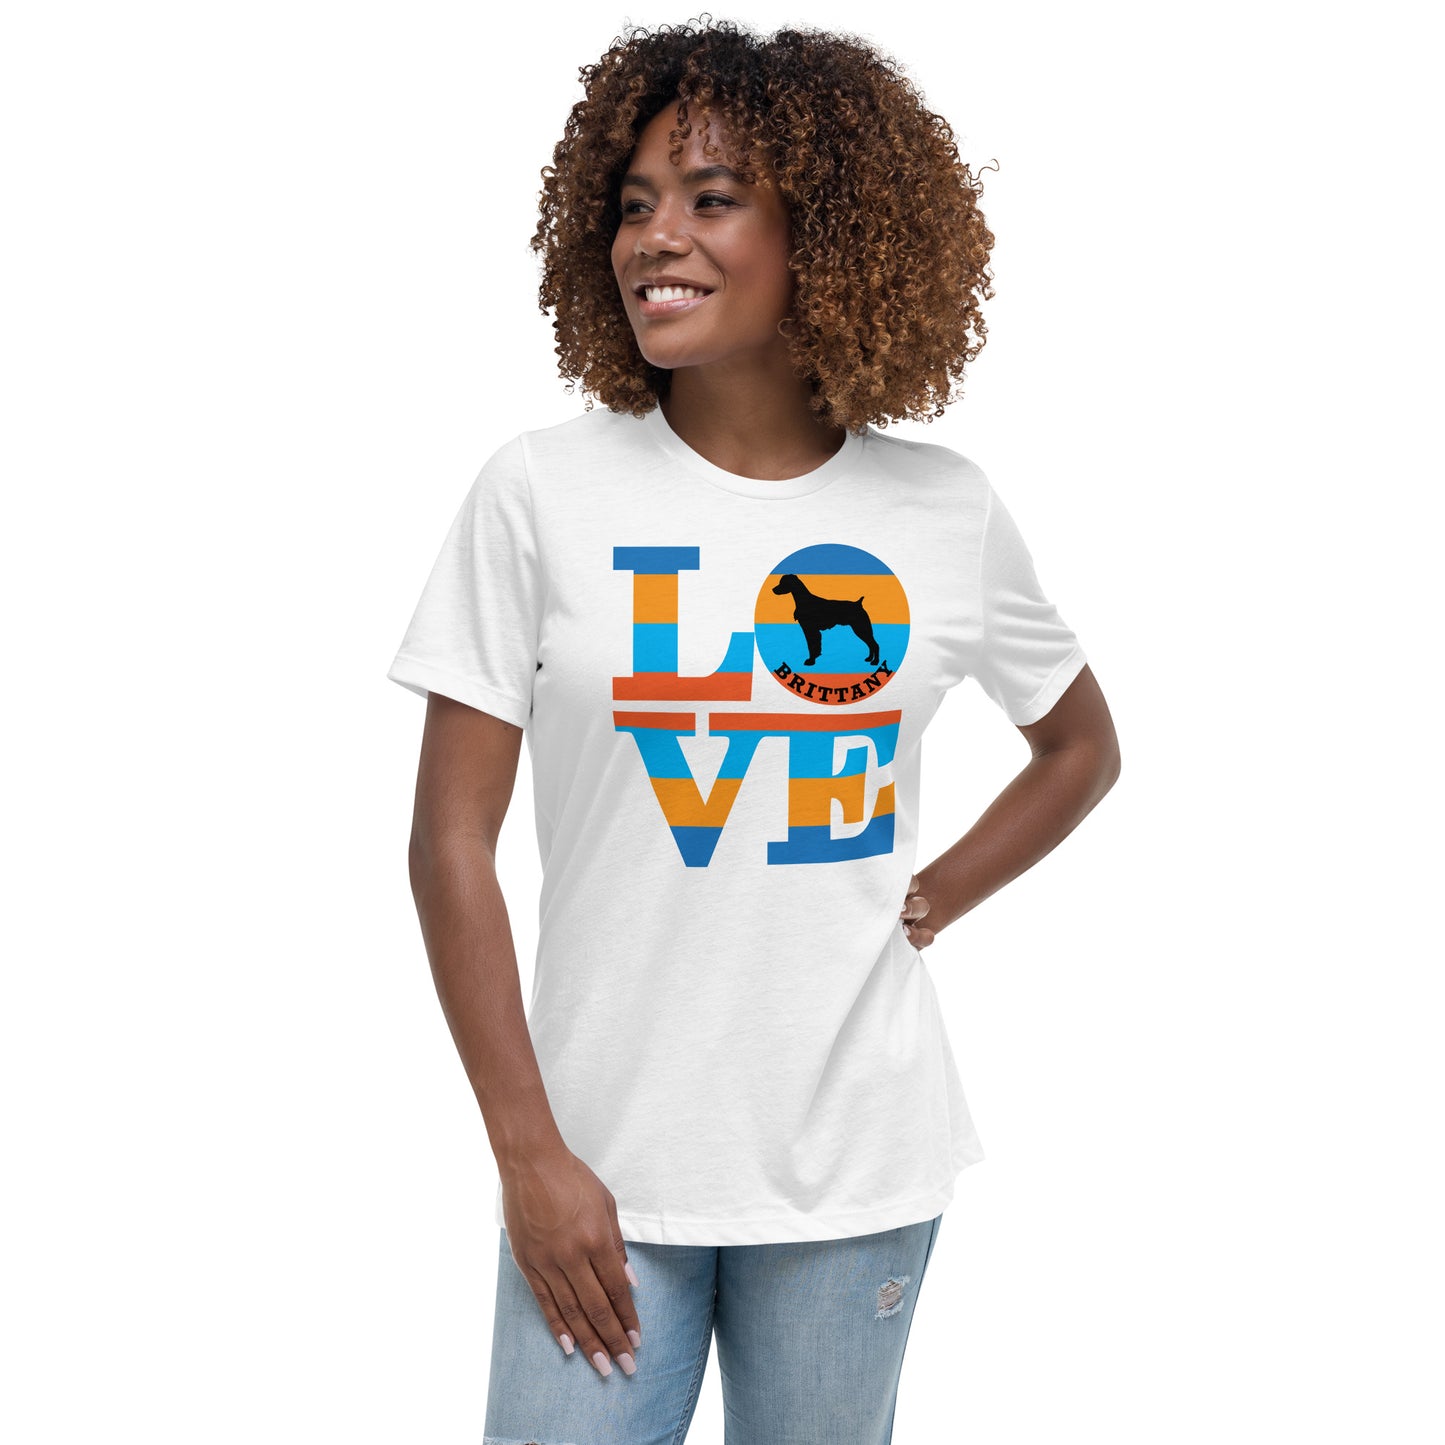 Brittany Love women’s white t-shirt by Dog Artistry.